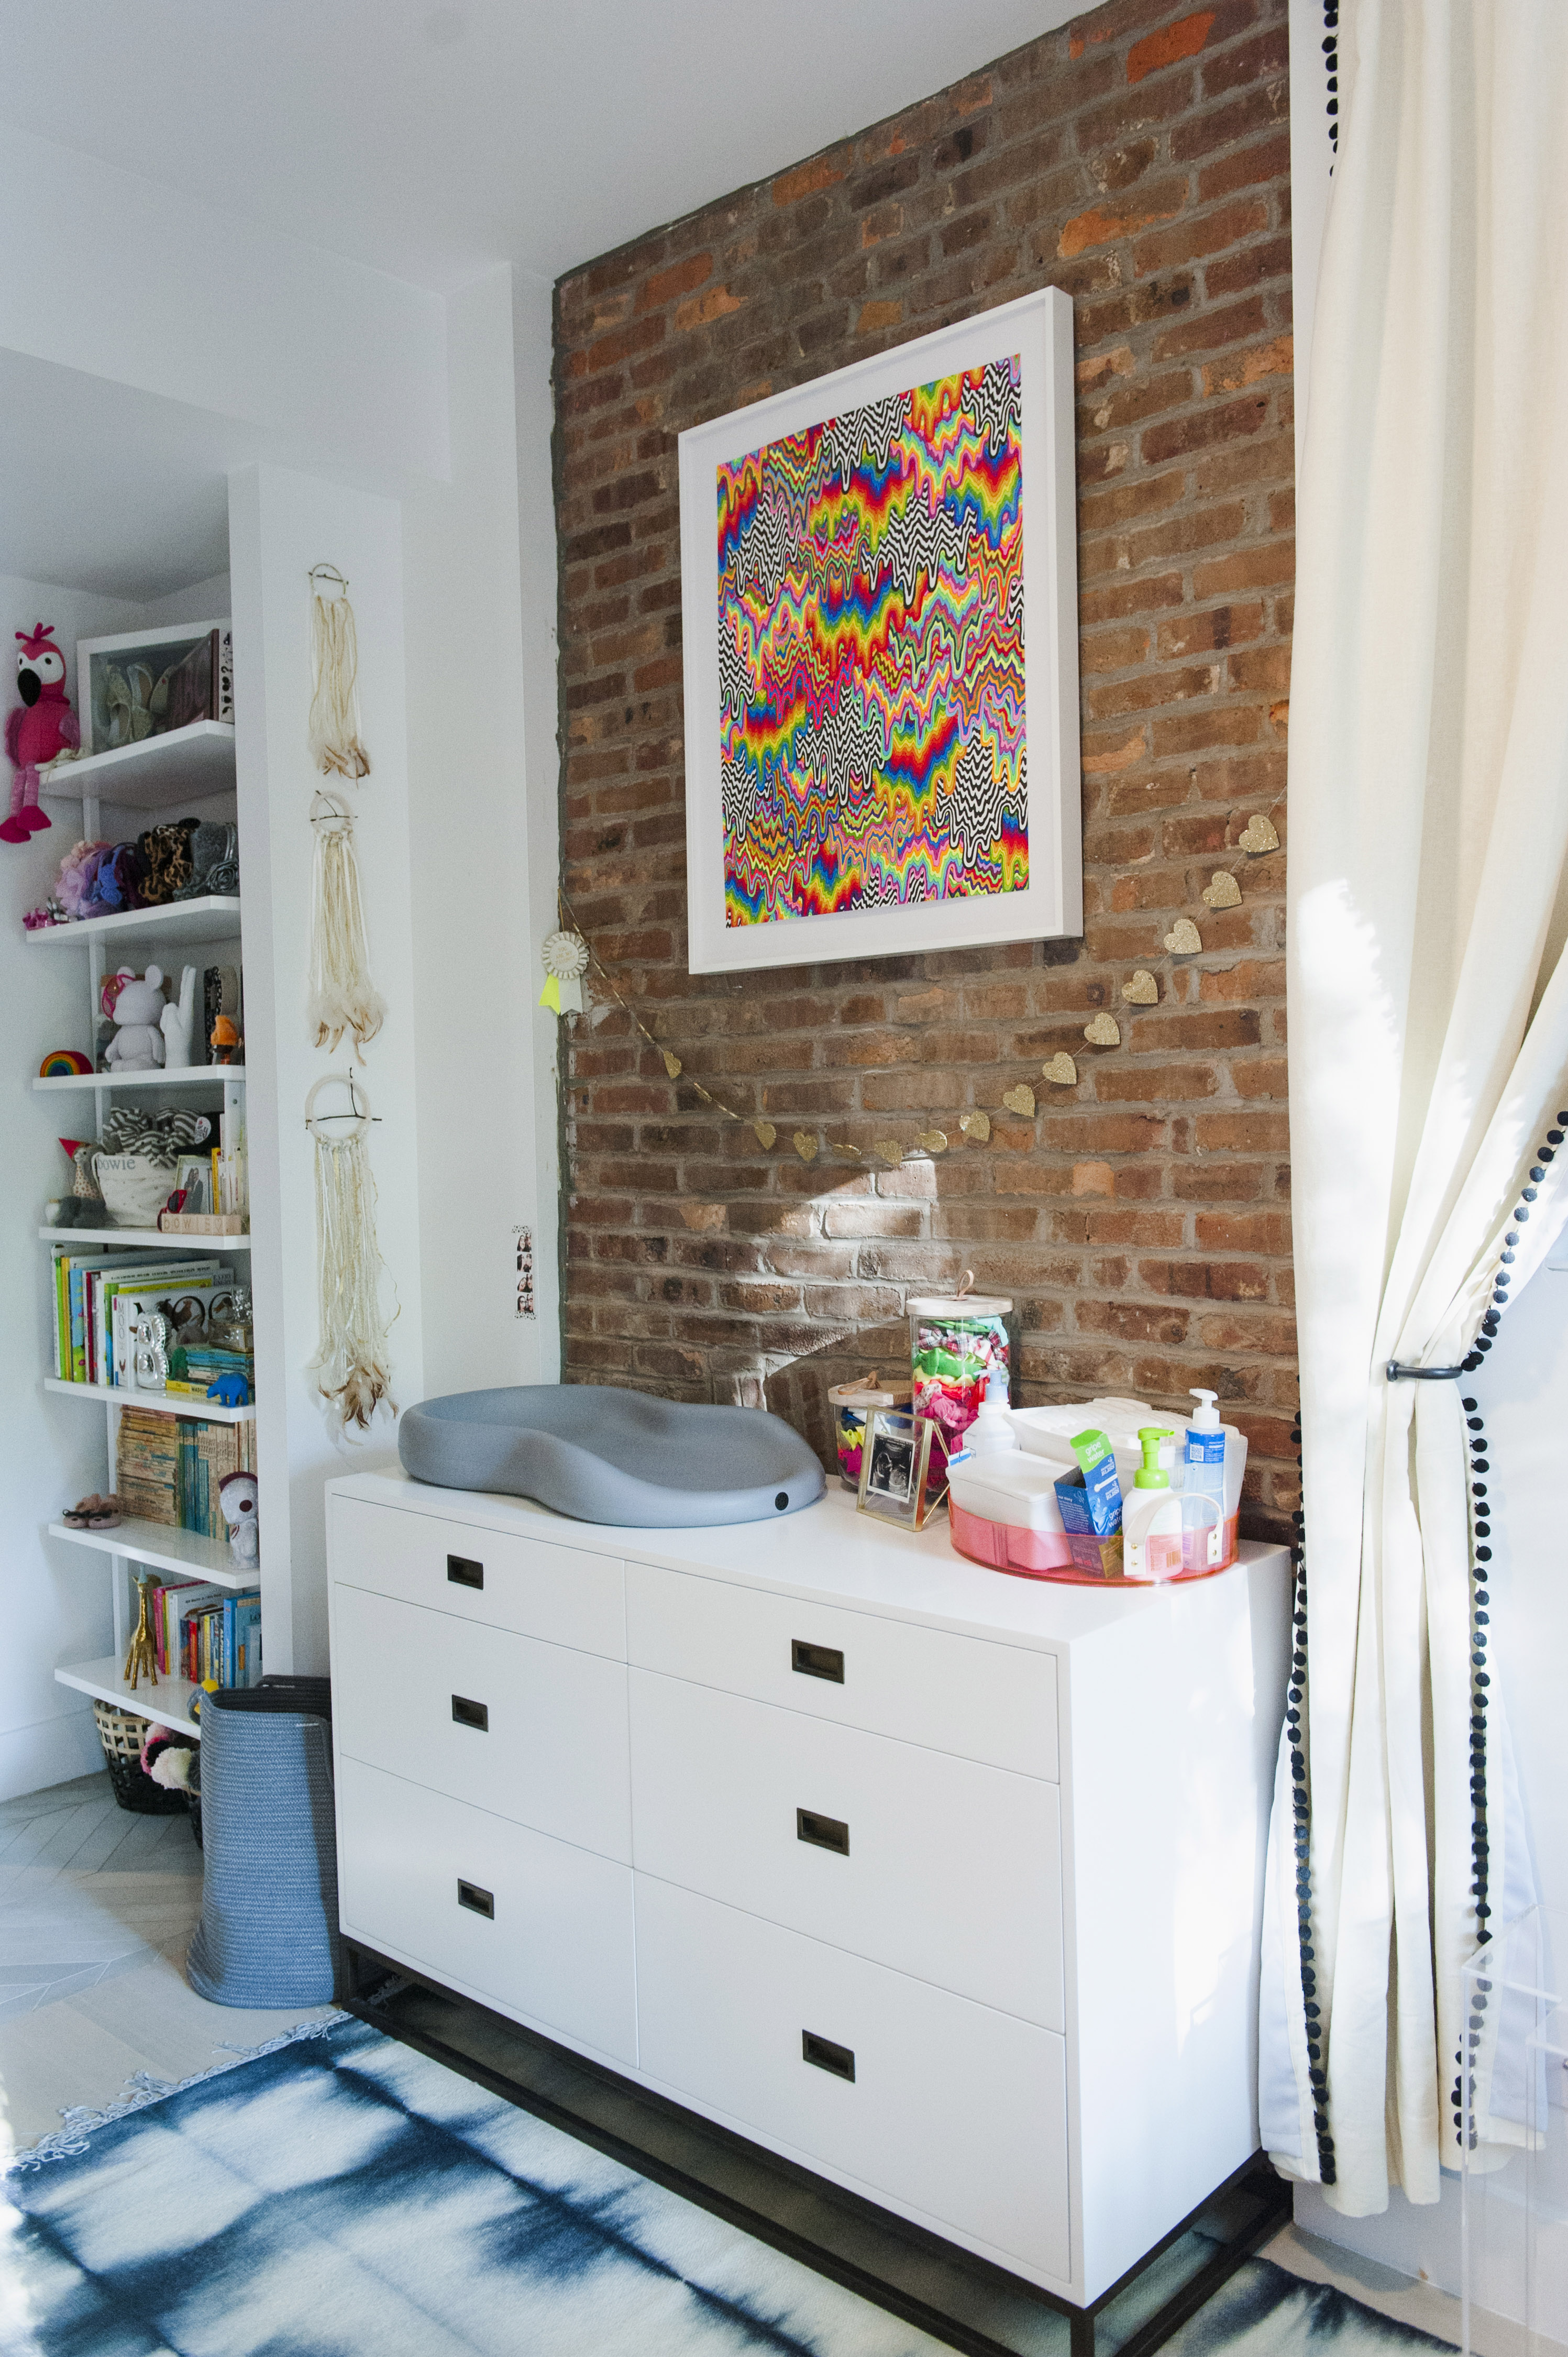 Bowie Layla's contemporary cool nursery